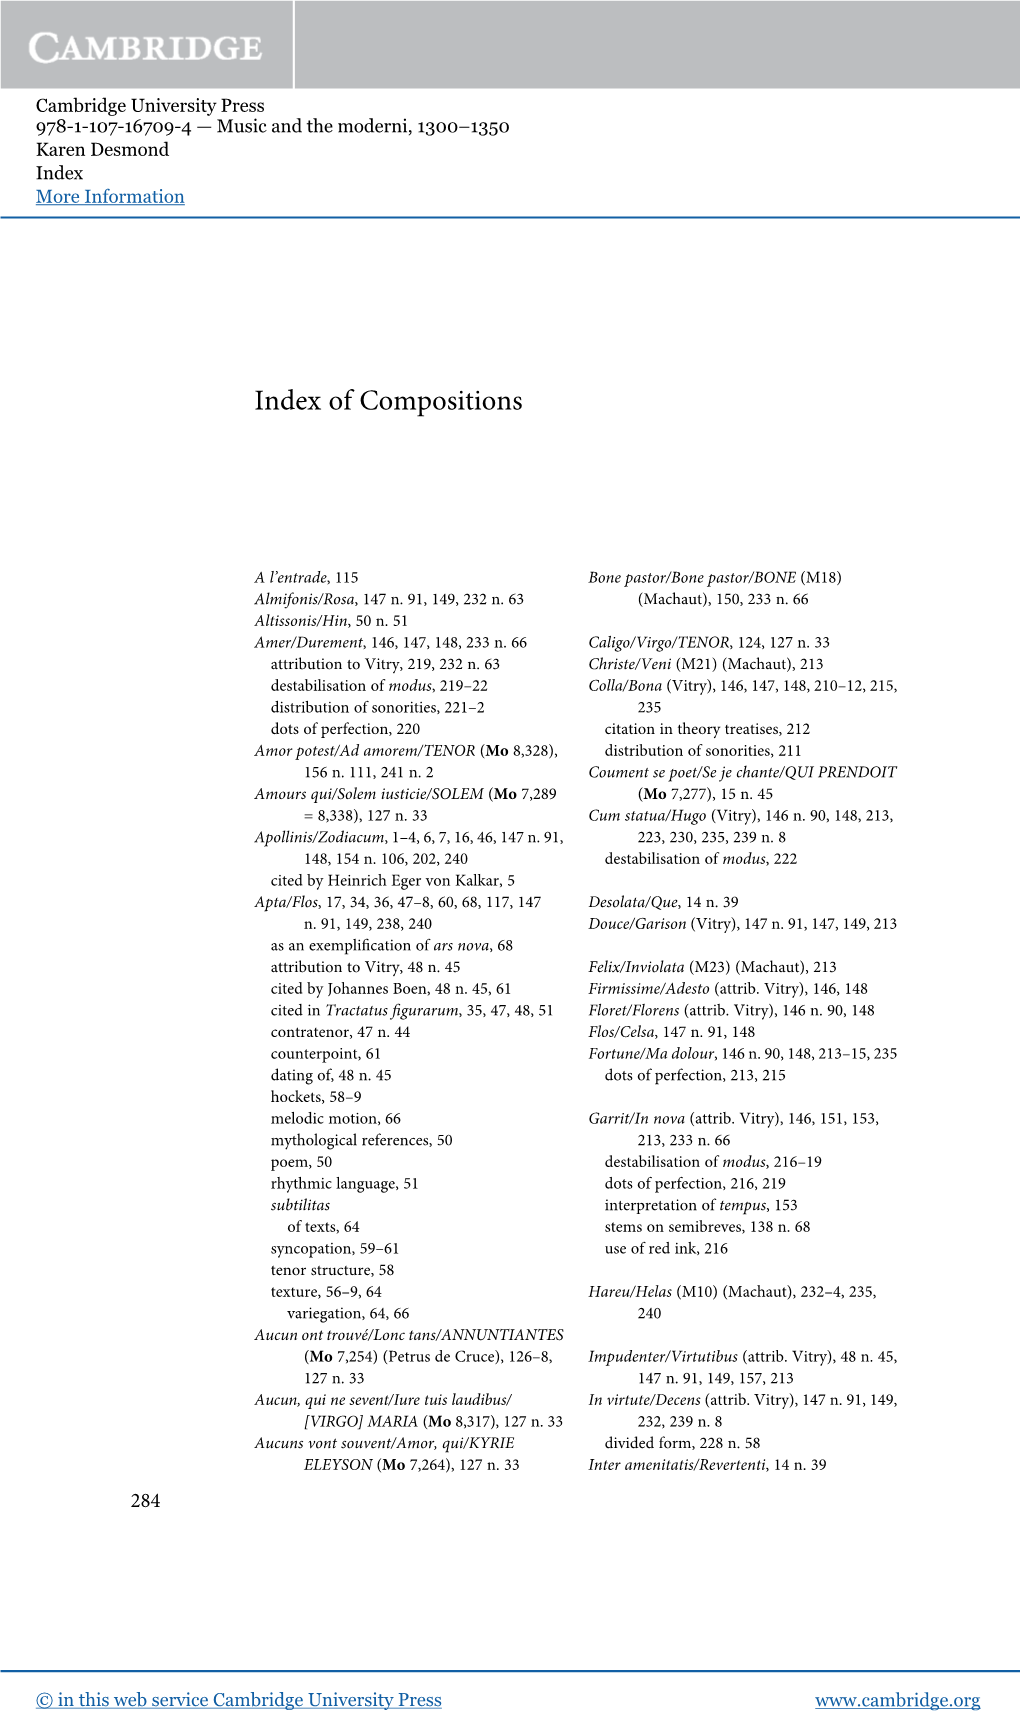 Index of Compositions